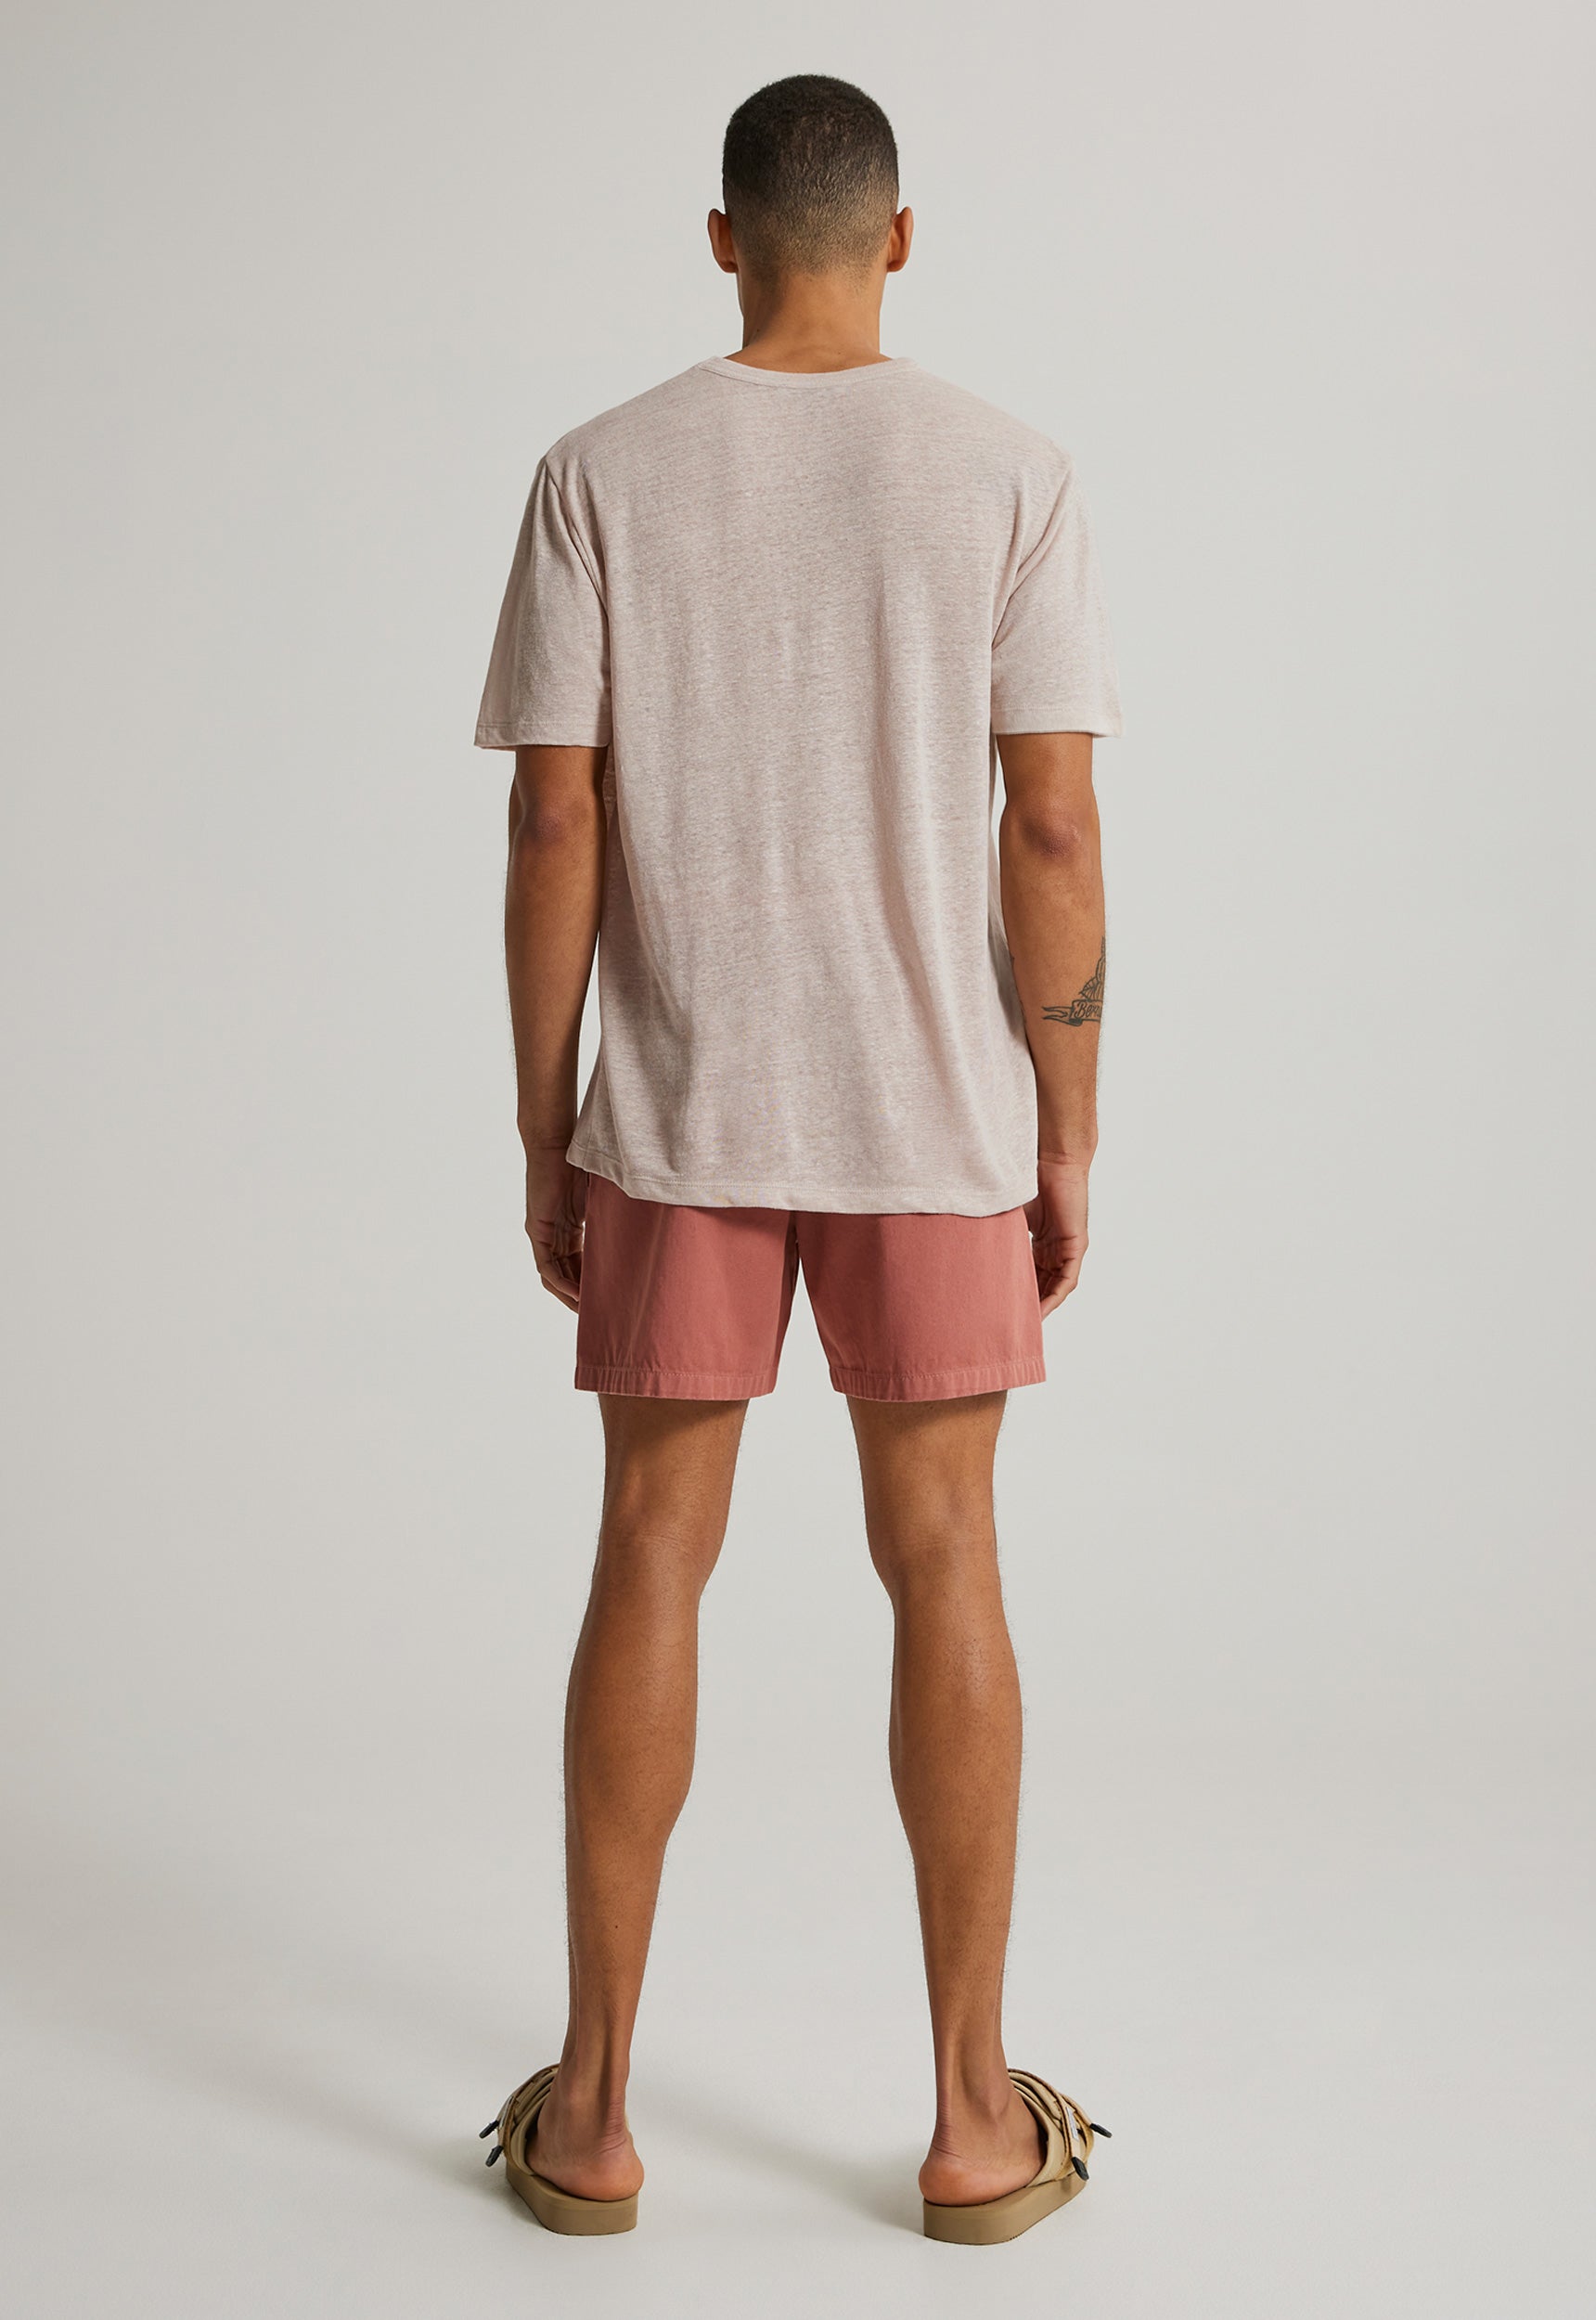 Yale Tee in Oyster